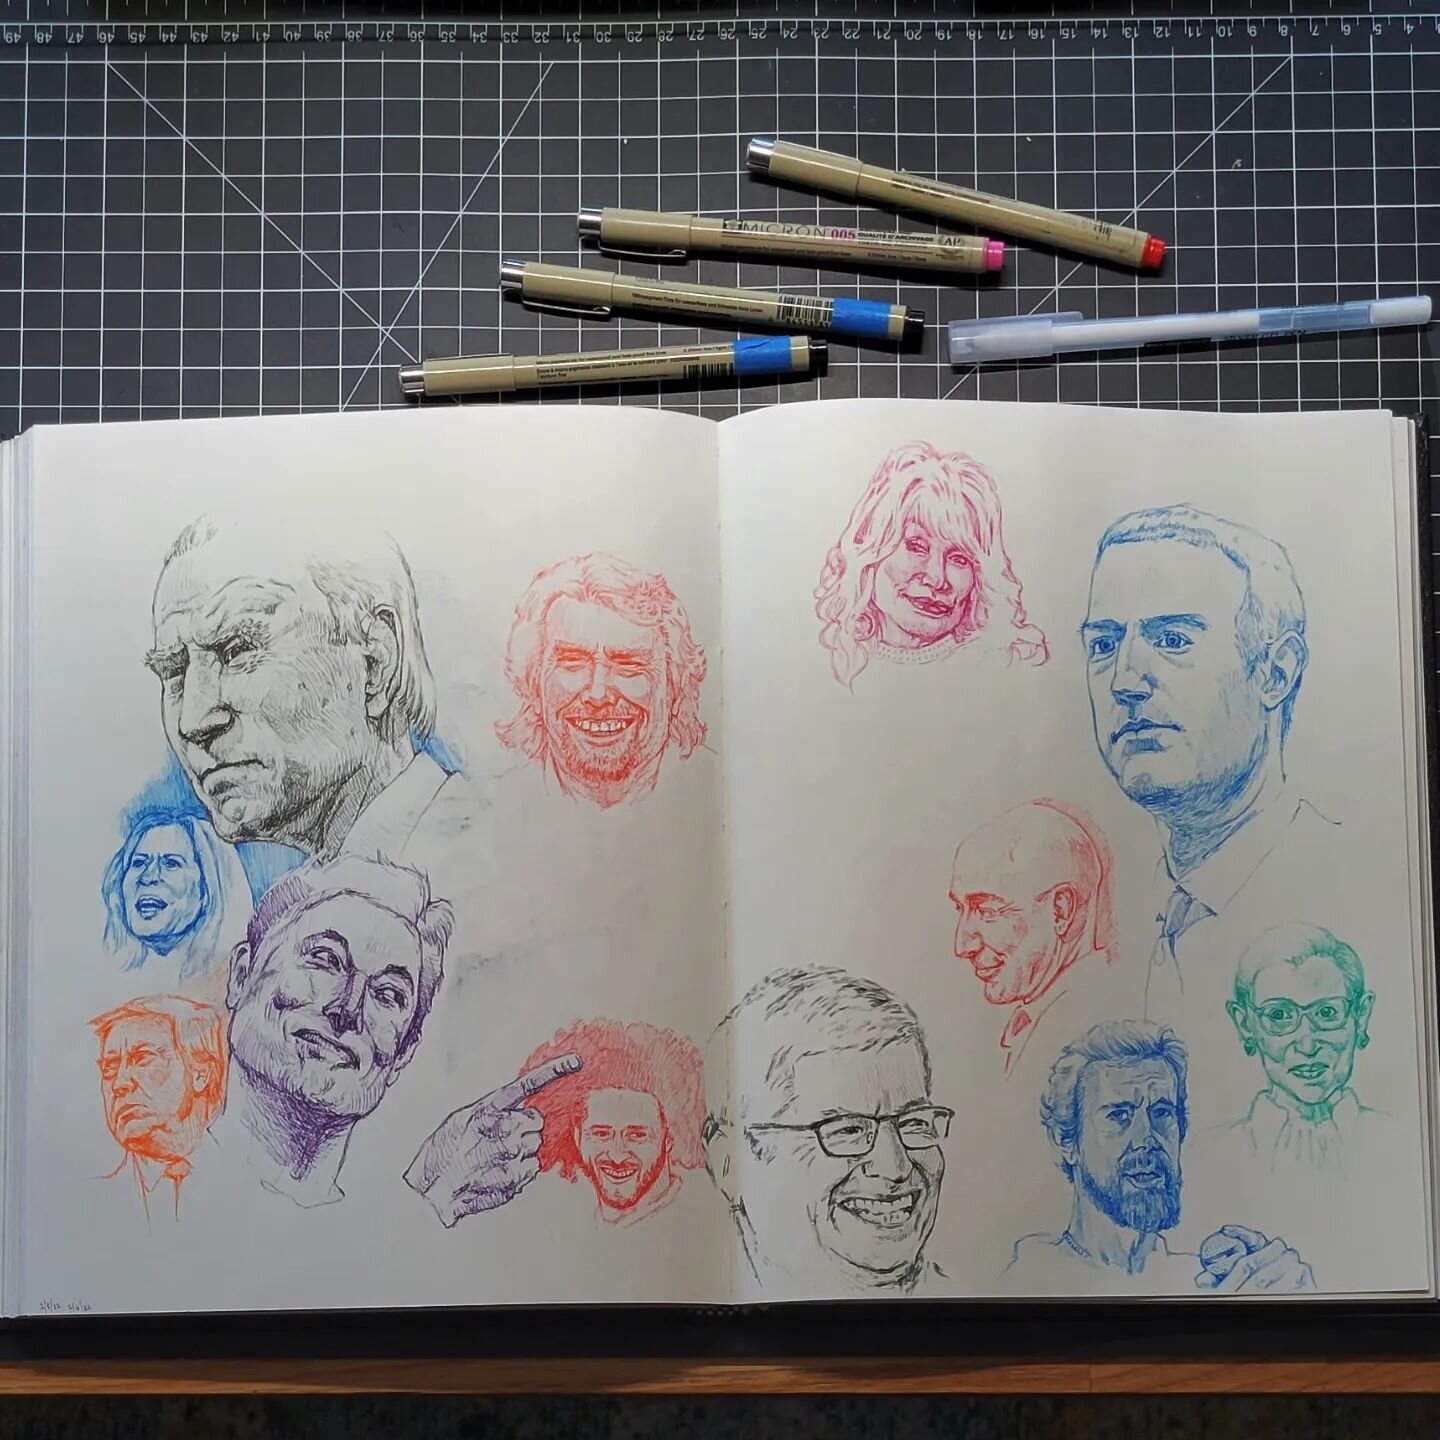 Continuing my no pencil likeness studies. I still tend to elongate the face and narrow the eyes but I'll get there. 
From top left to right counter cw:
Richard, Biden, Harris, Trump, Elon, Colin, Tim, Bezos, Jack Dorsey, RBG, Zuckerberg &amp; Dolly P